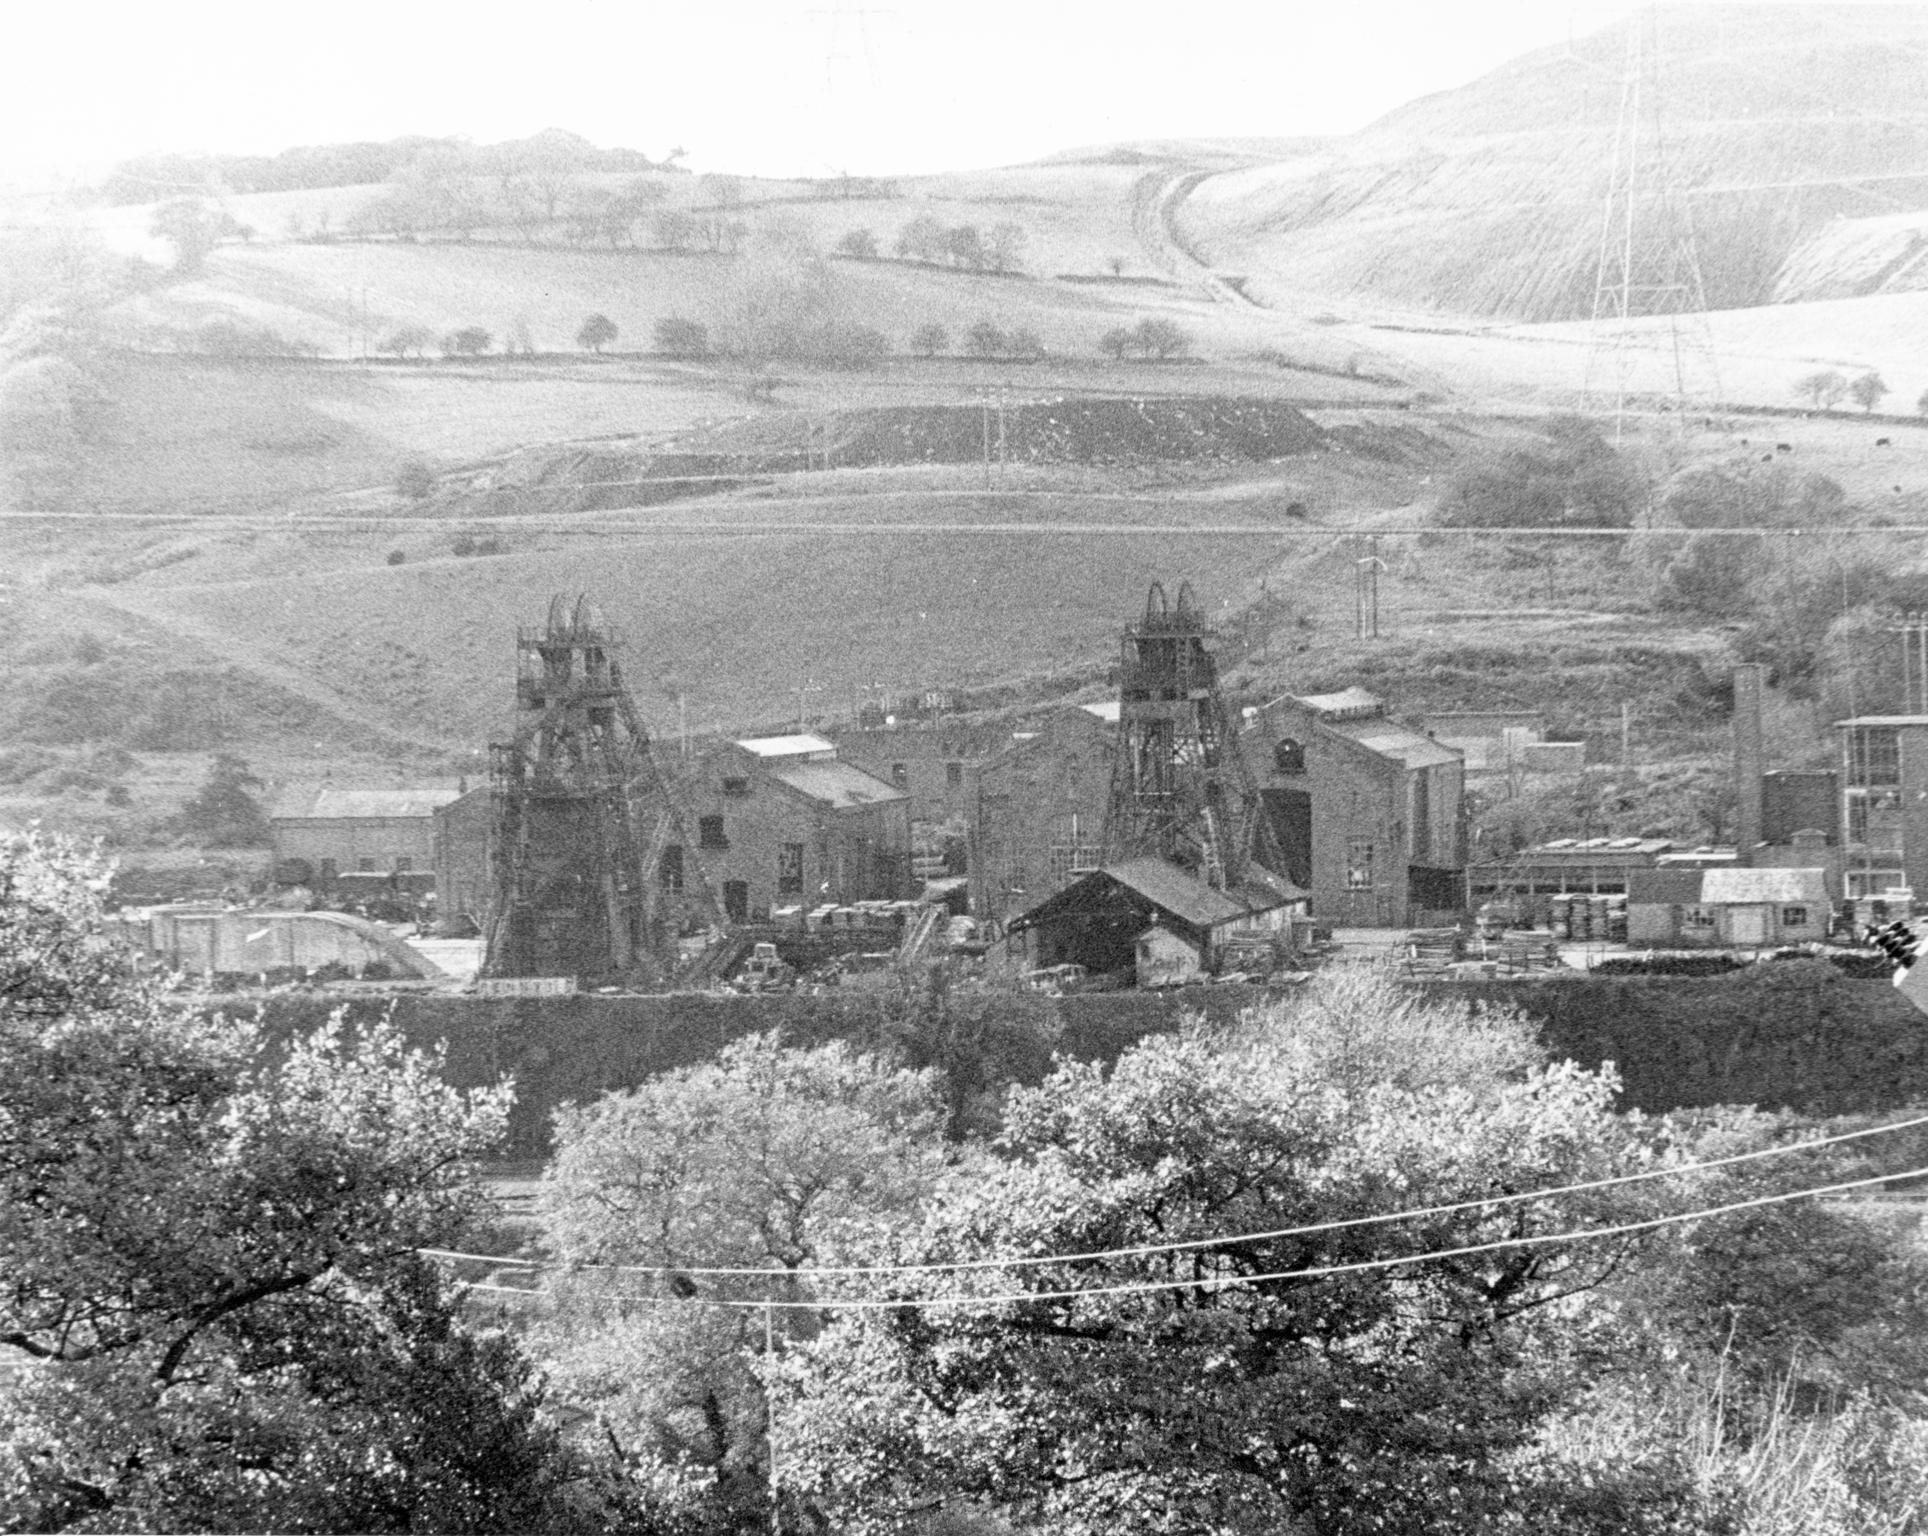 Coedely Colliery, photograph